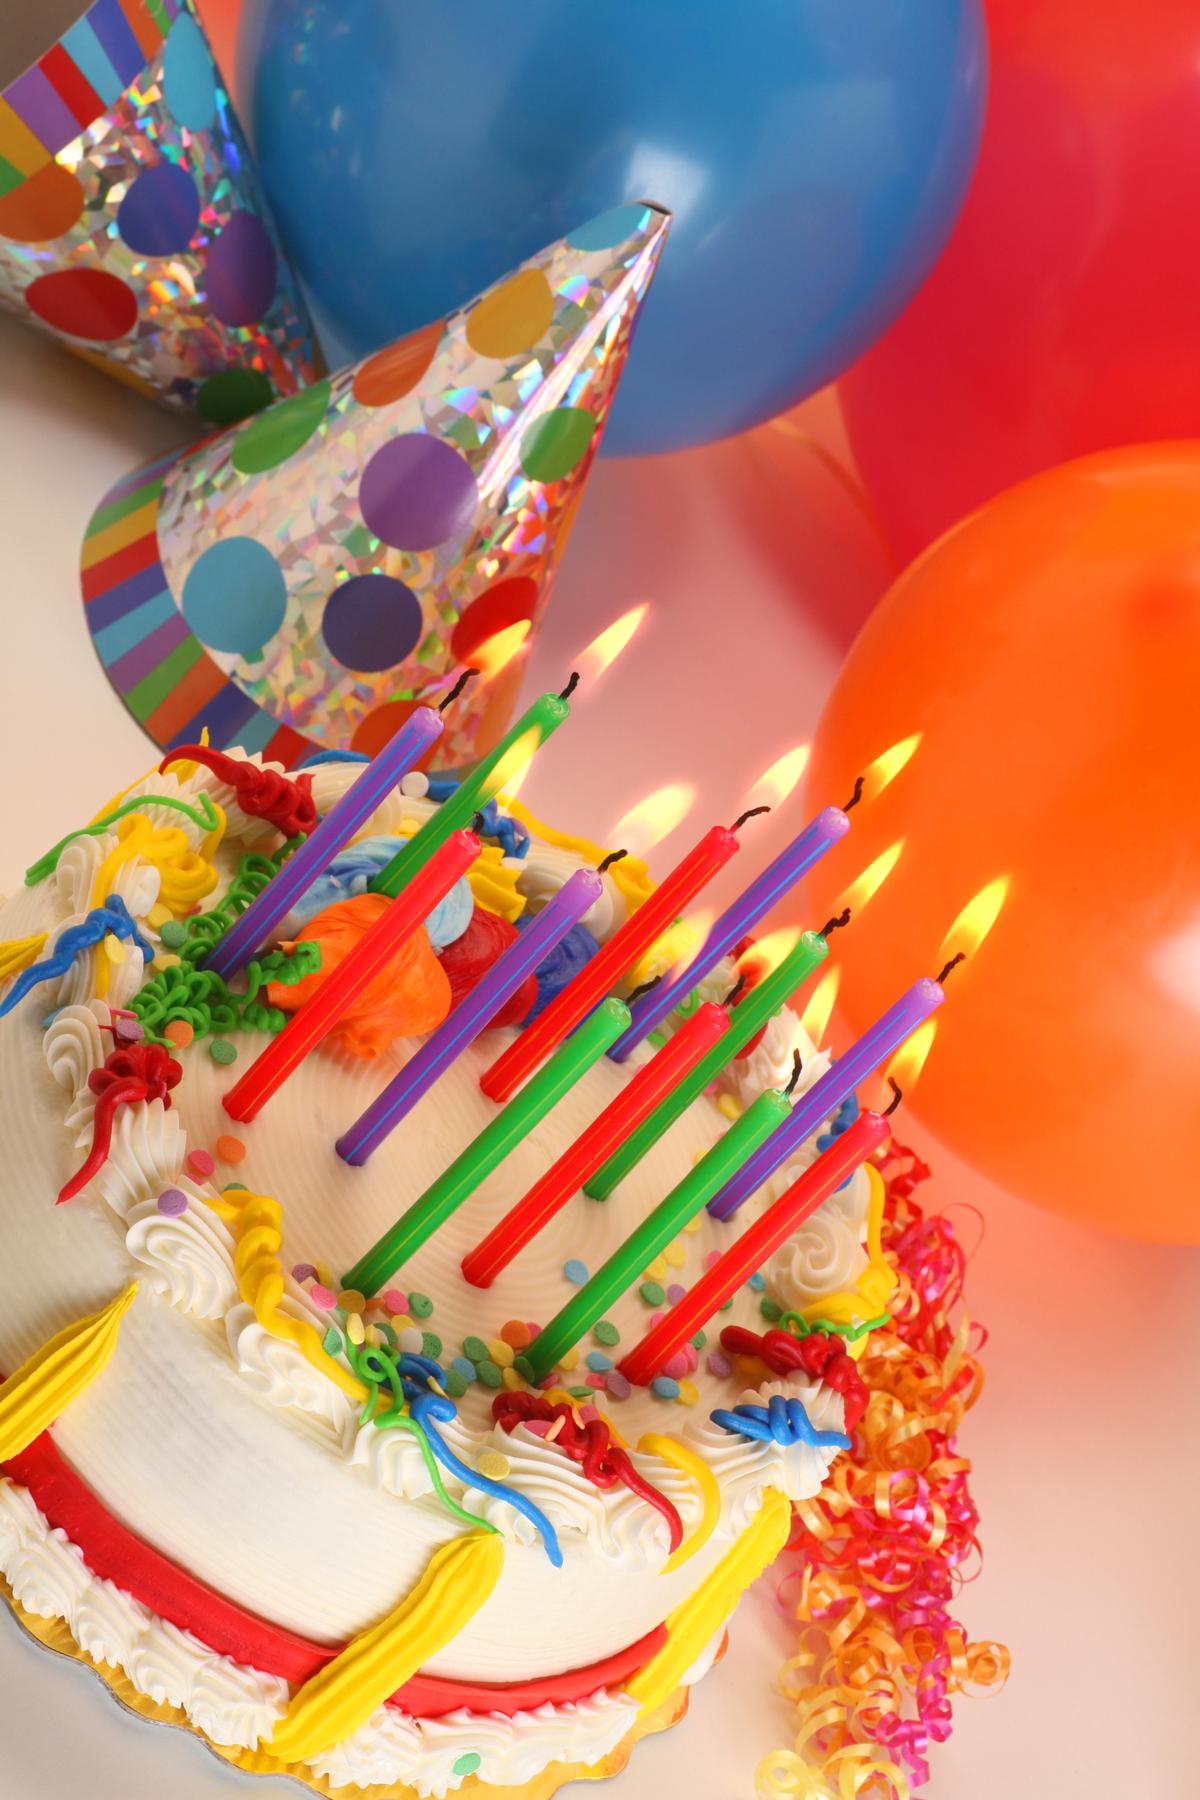 fret not! here's a list of great last minute birthday party ideas